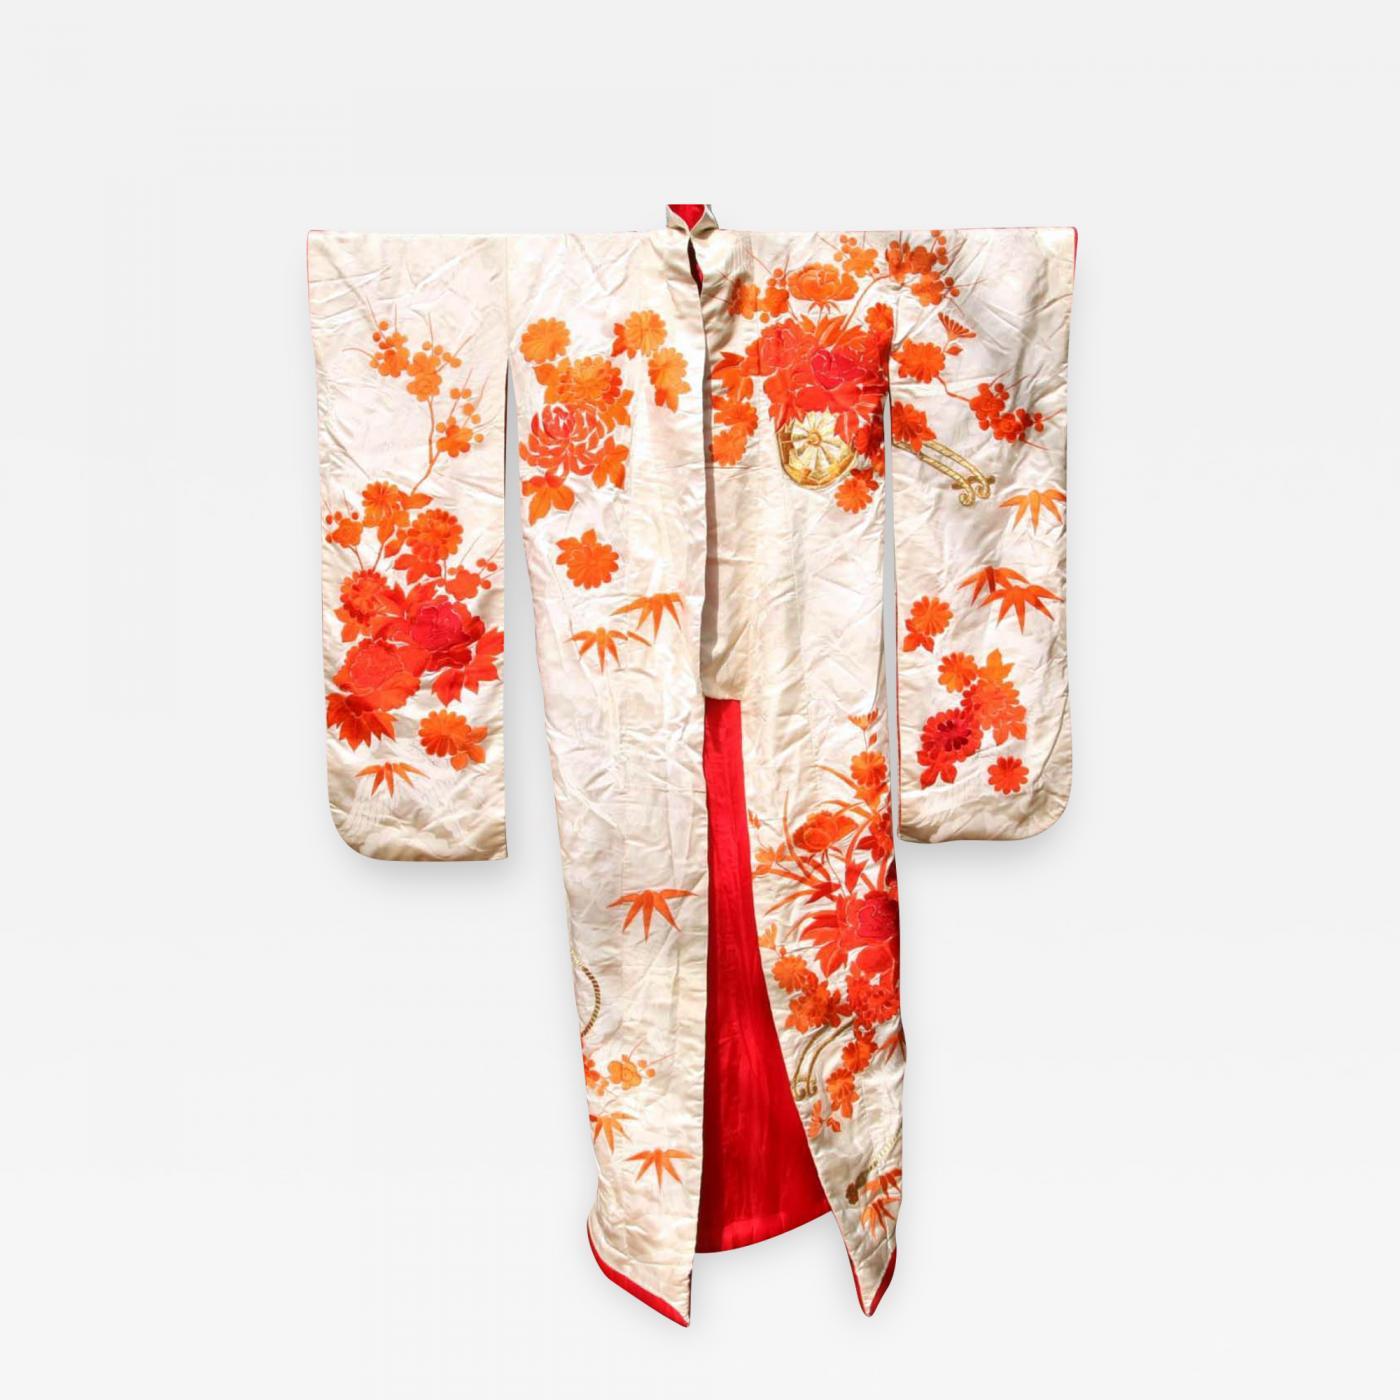 An exceptional Japanese silk wedding ceremonial kimono Uchikake, circa 1930-60s in the oriental Art Deco fashion. Cream white subtly patterned silk background with elaborate and intricate embroidery in orange, red and gold threads that depict